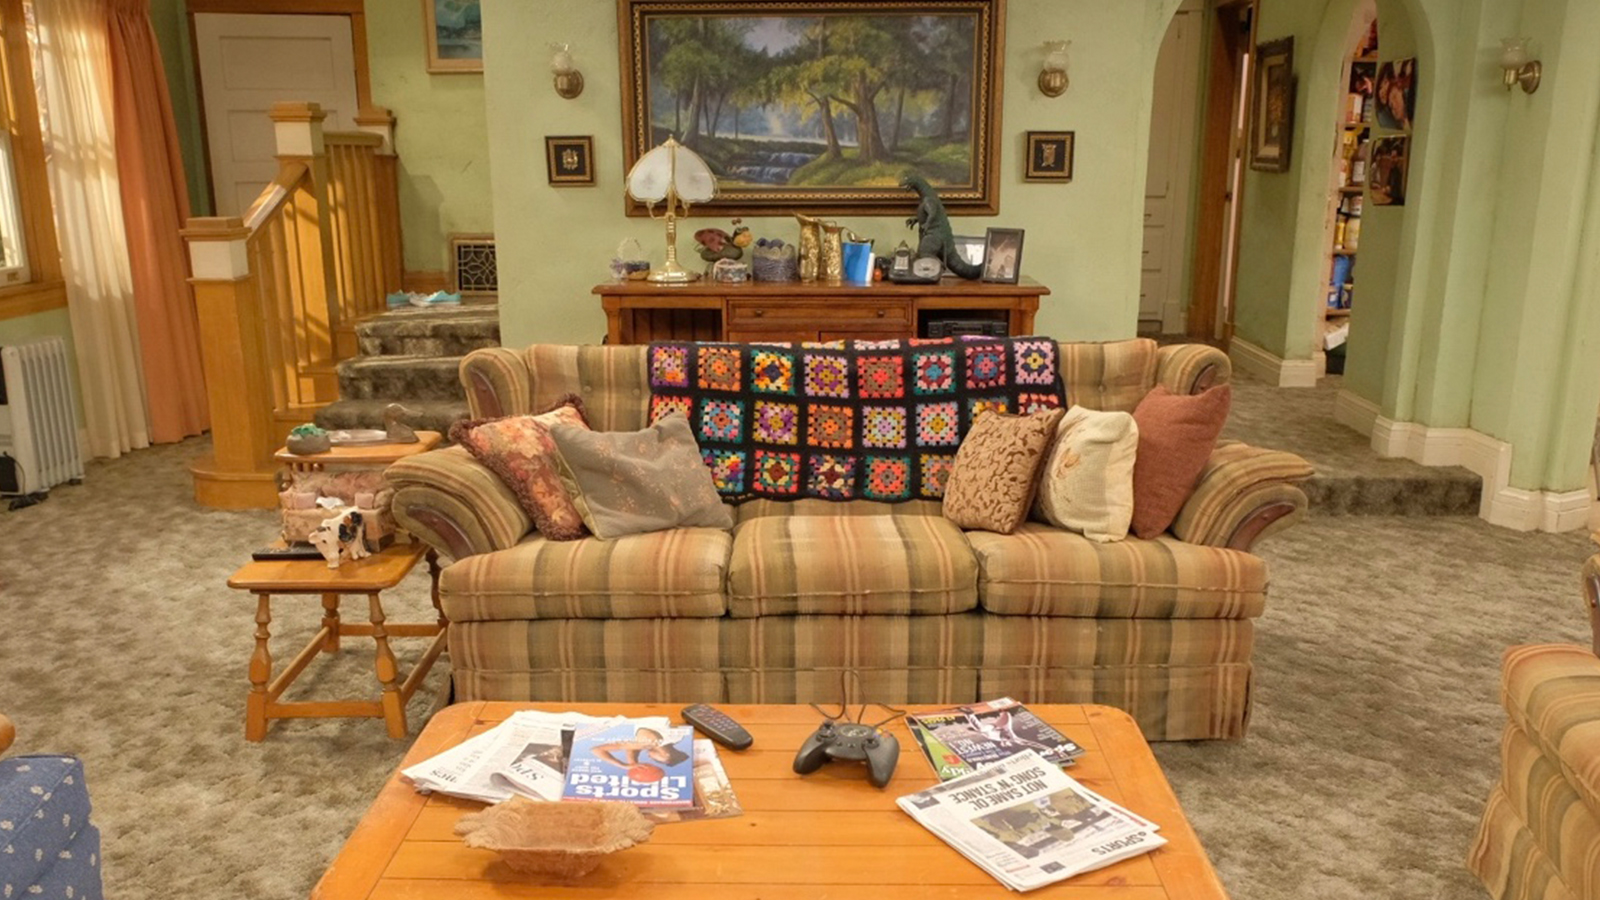 The Conners - Couch and main living room